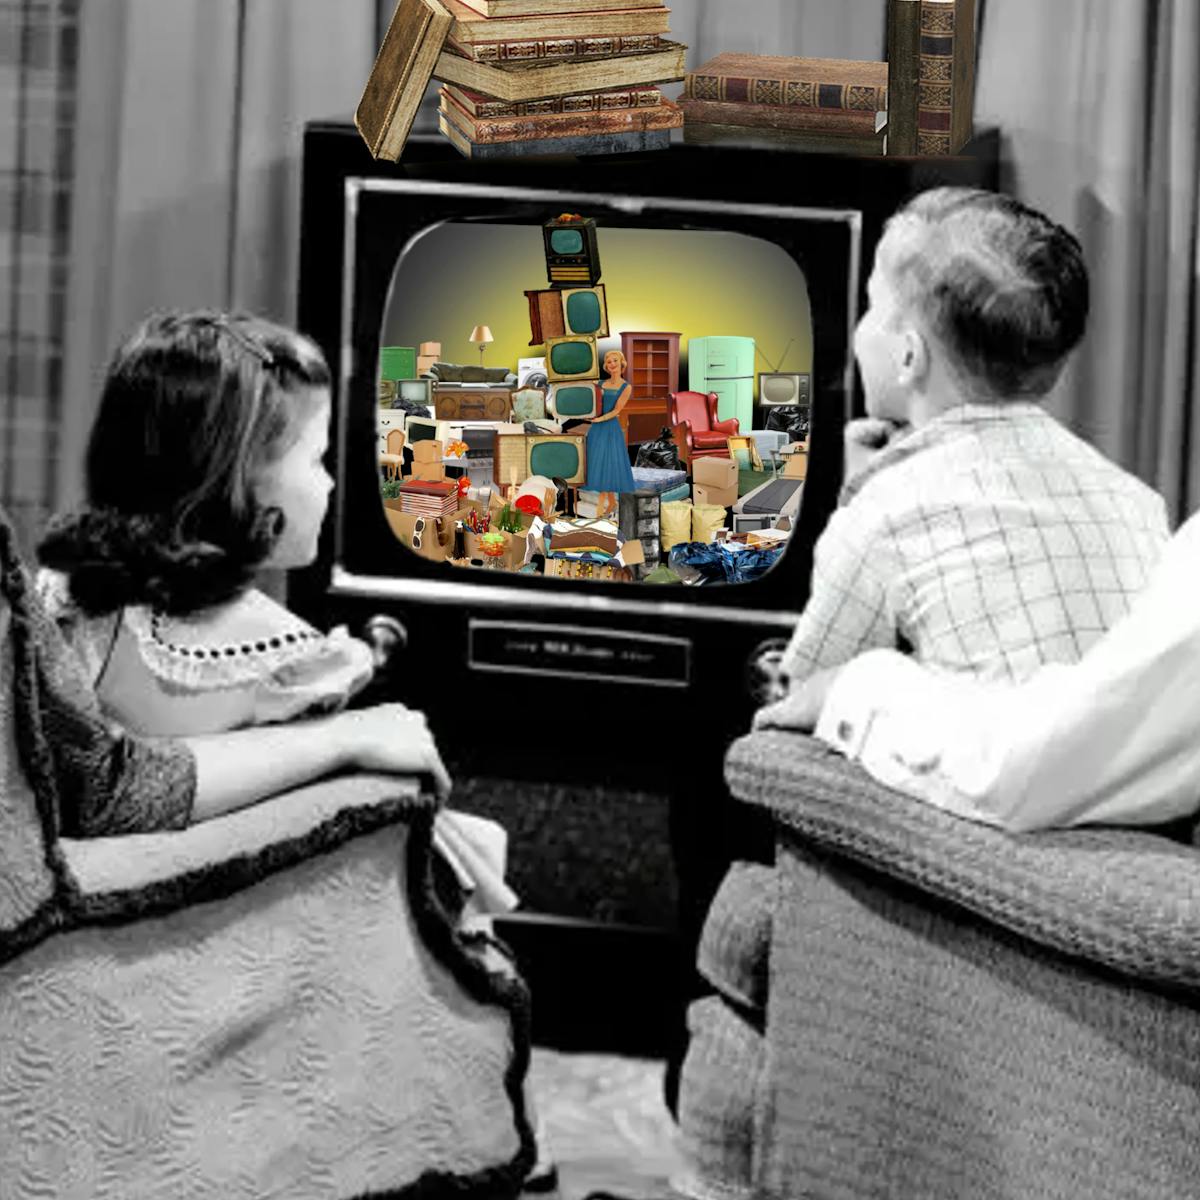 Digital collage showing a family of four (a mother, father and a young boy and girl) sat on two armchairs watching an old fashioned television in black and white. On the television screen there are lots of household objects crowded together and stack on top of one another haphazardly. There are some ornate hardback books piled up on top of the television set. 